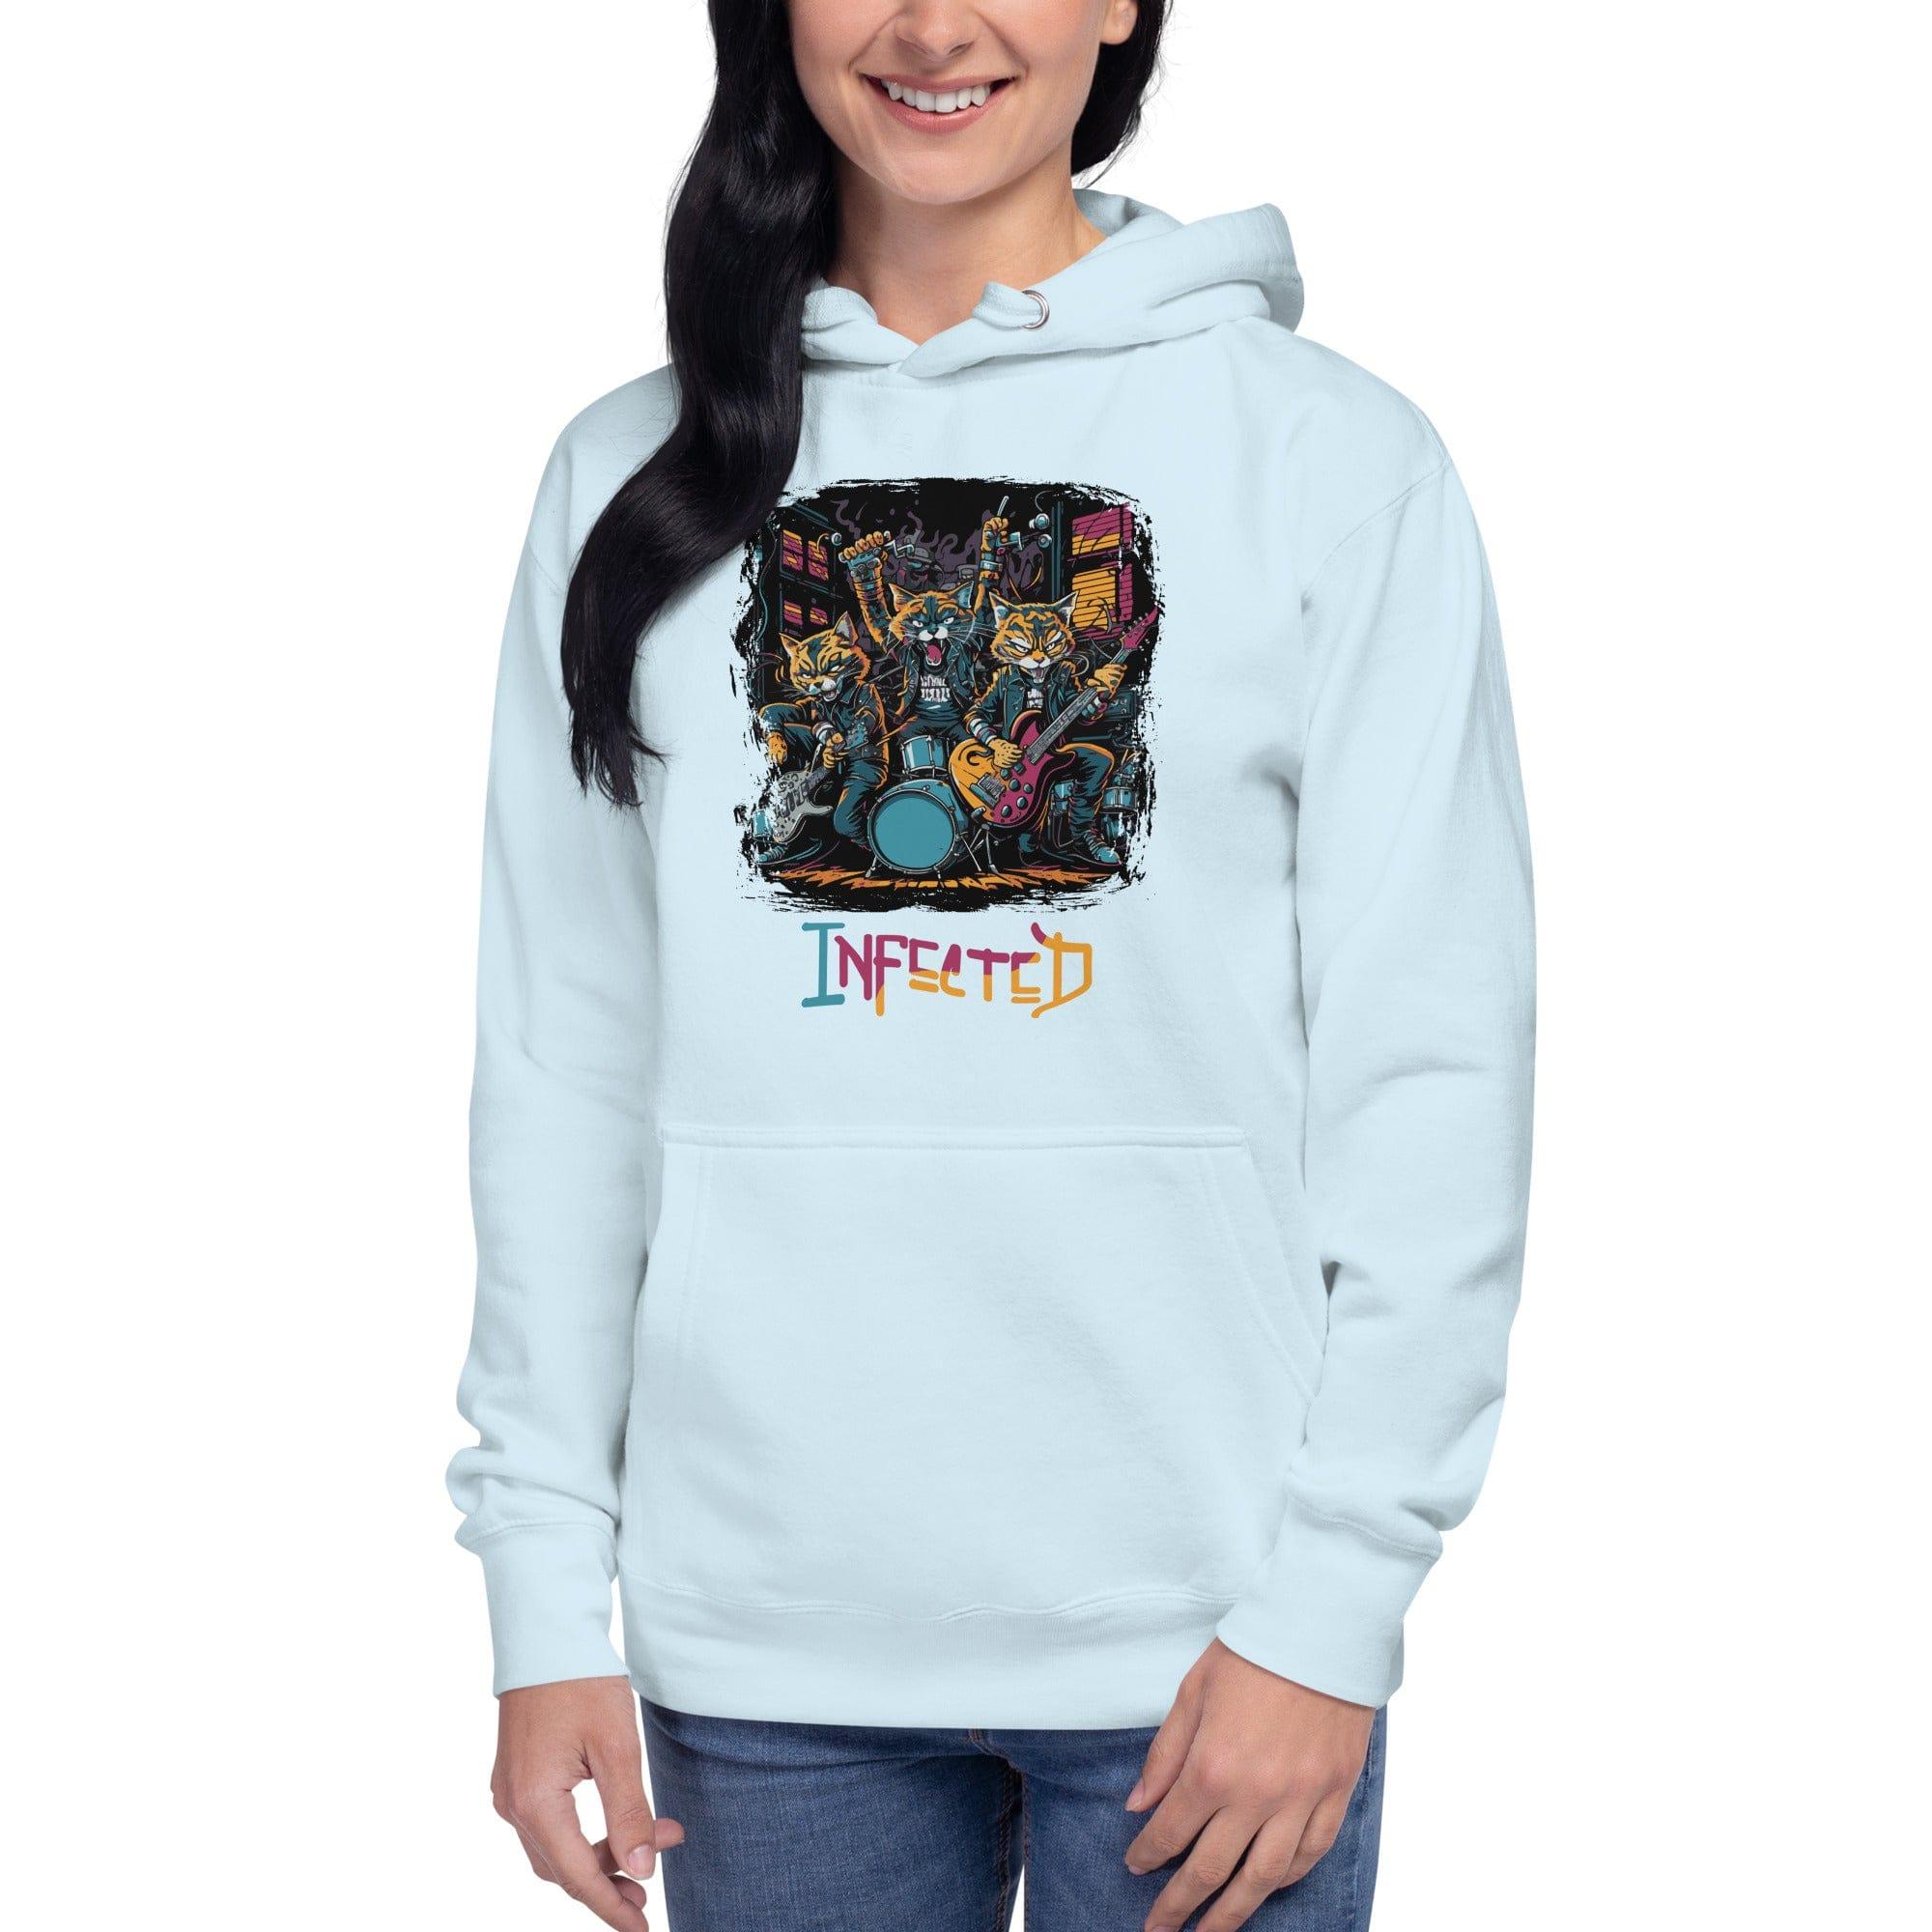 Infected Unisex Hoodie - Beyond T-shirts